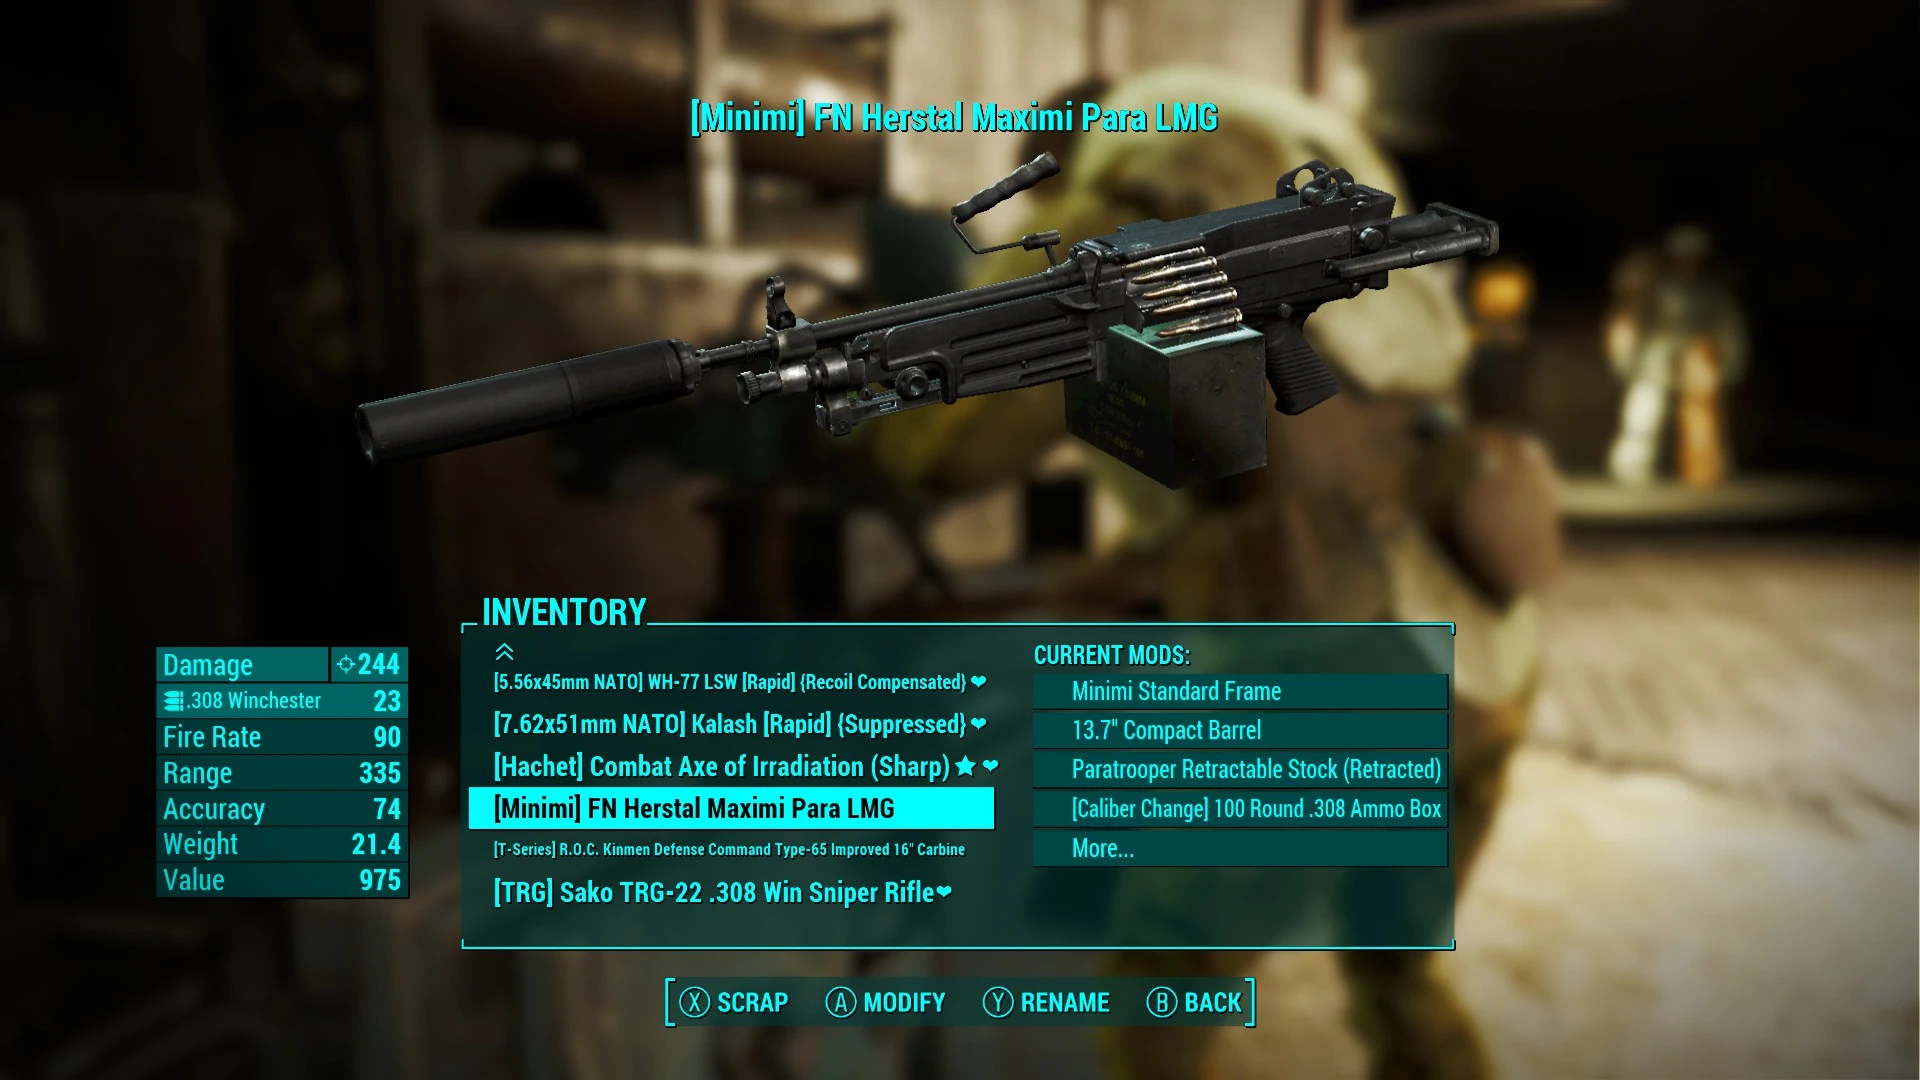 Fallout 4 weaponsmith extended